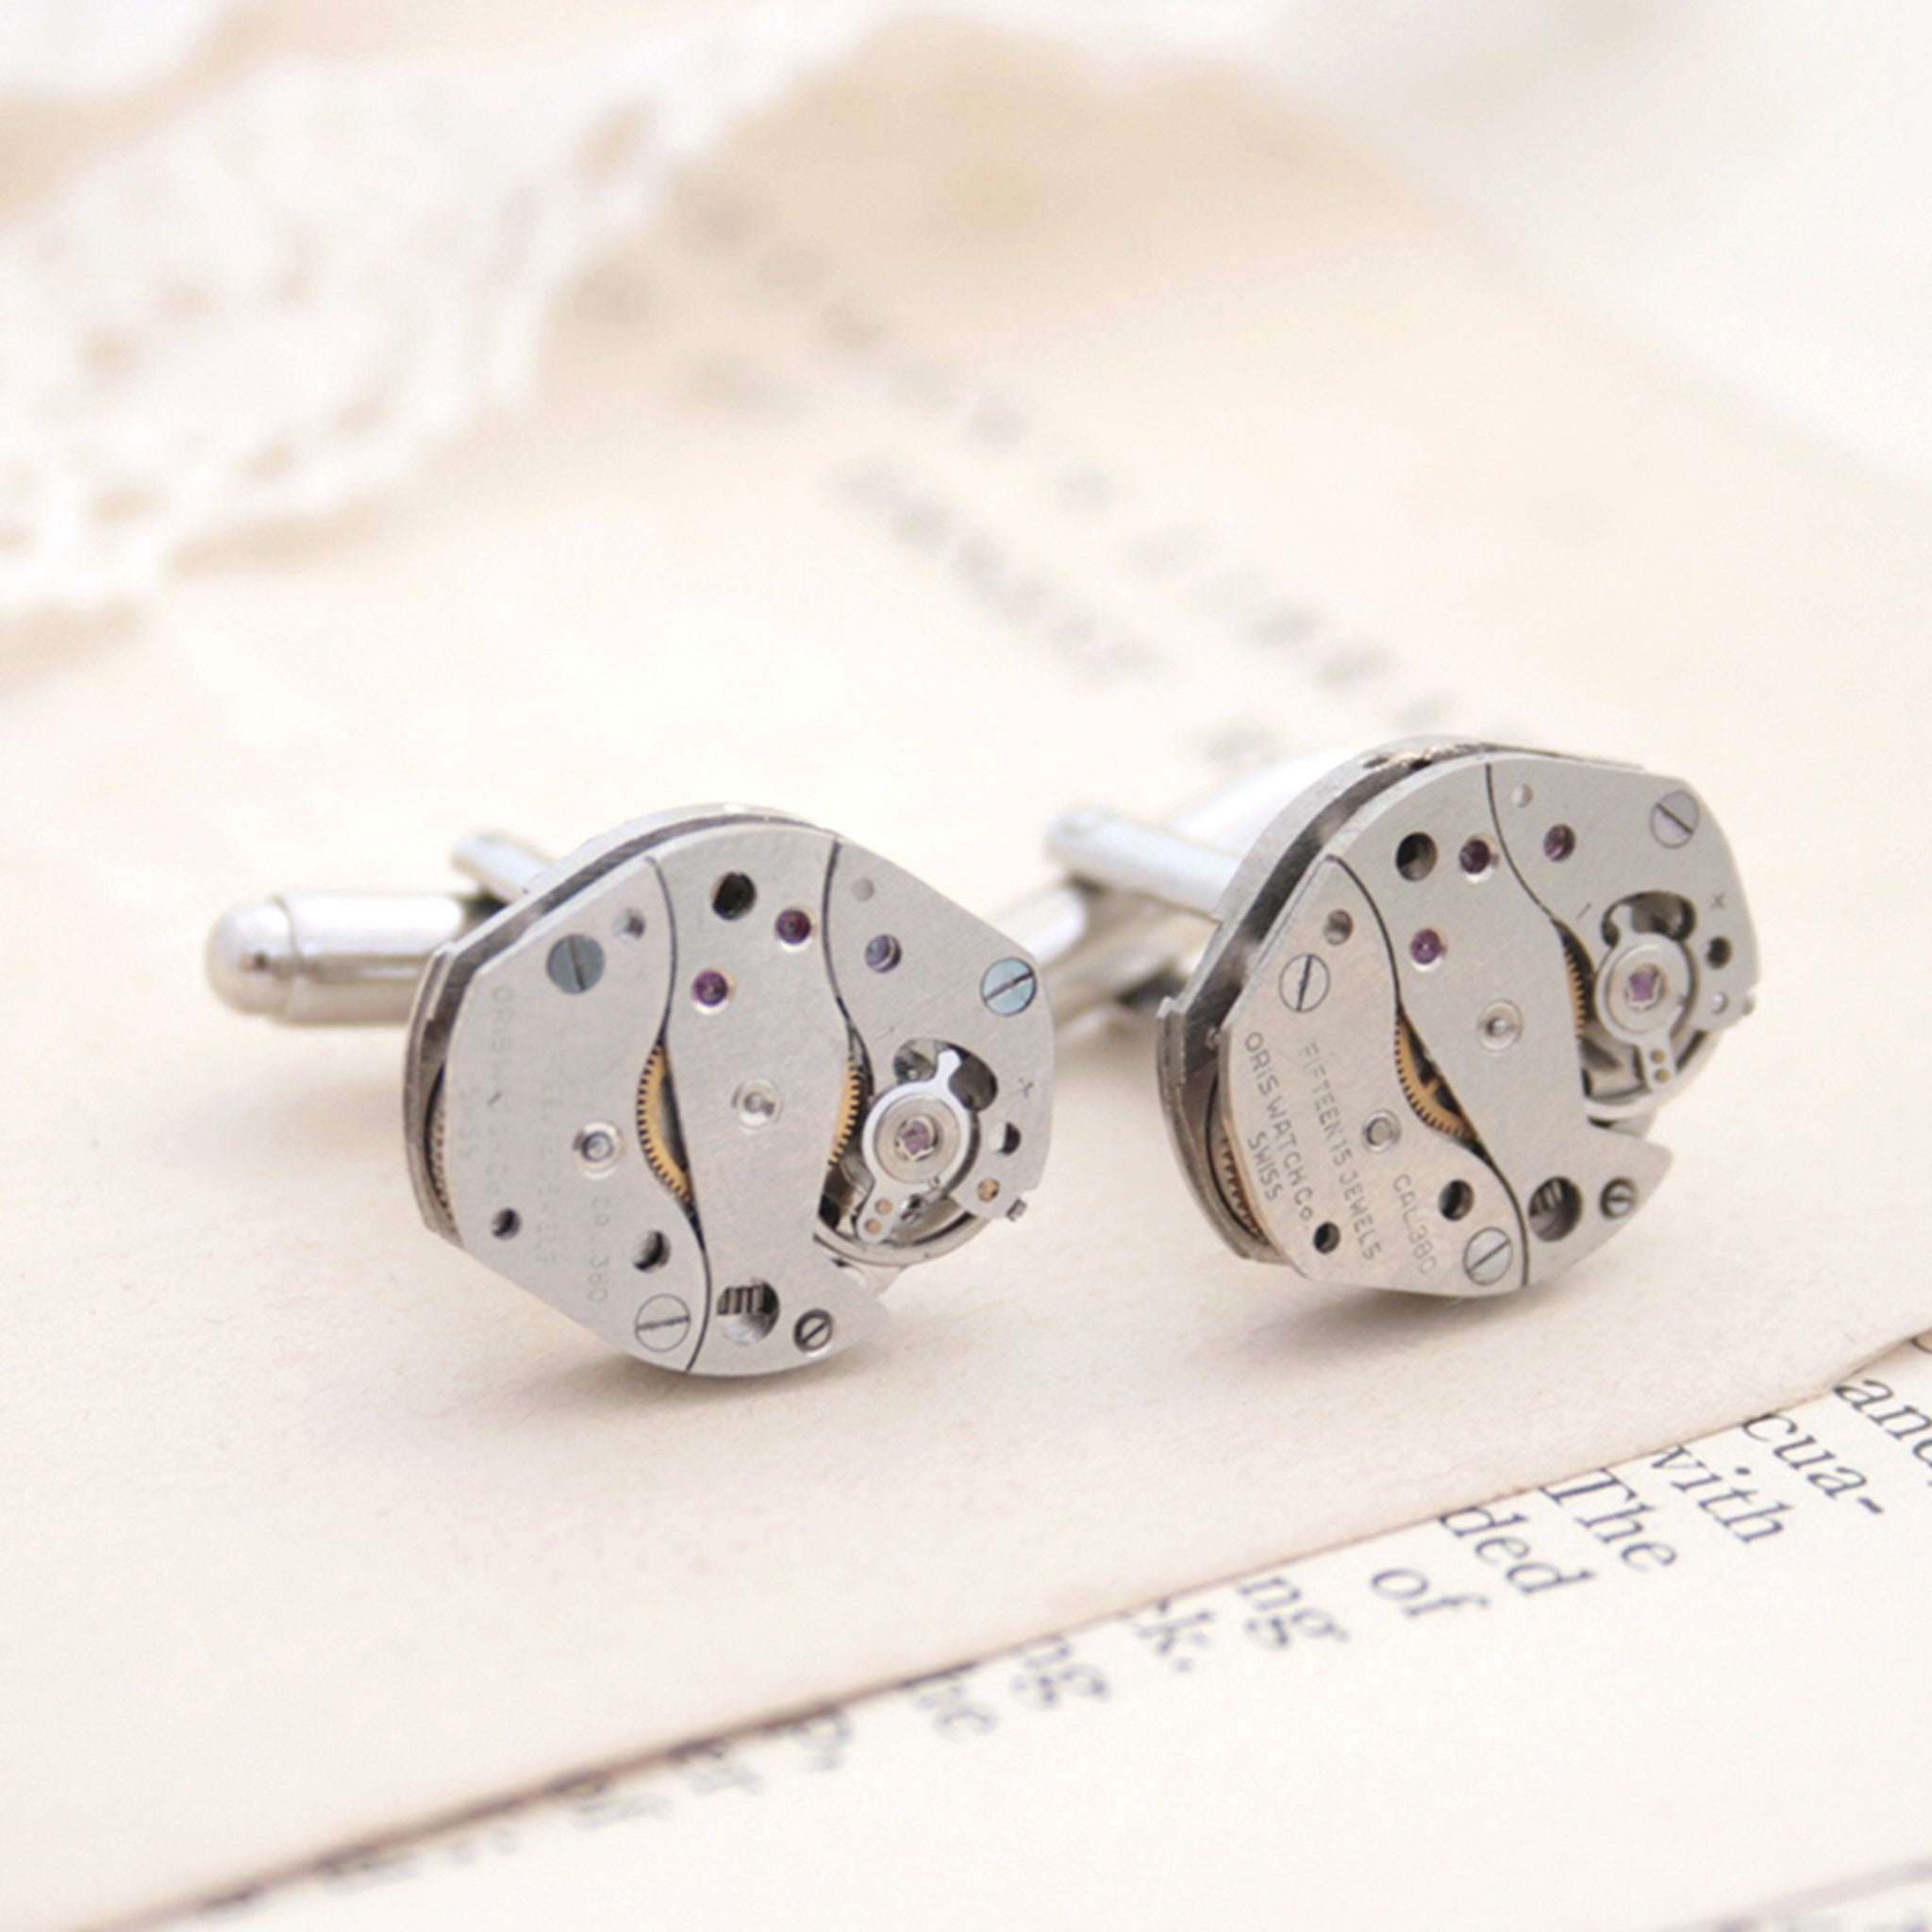 cool watch cufflinks for men featuring antique movements